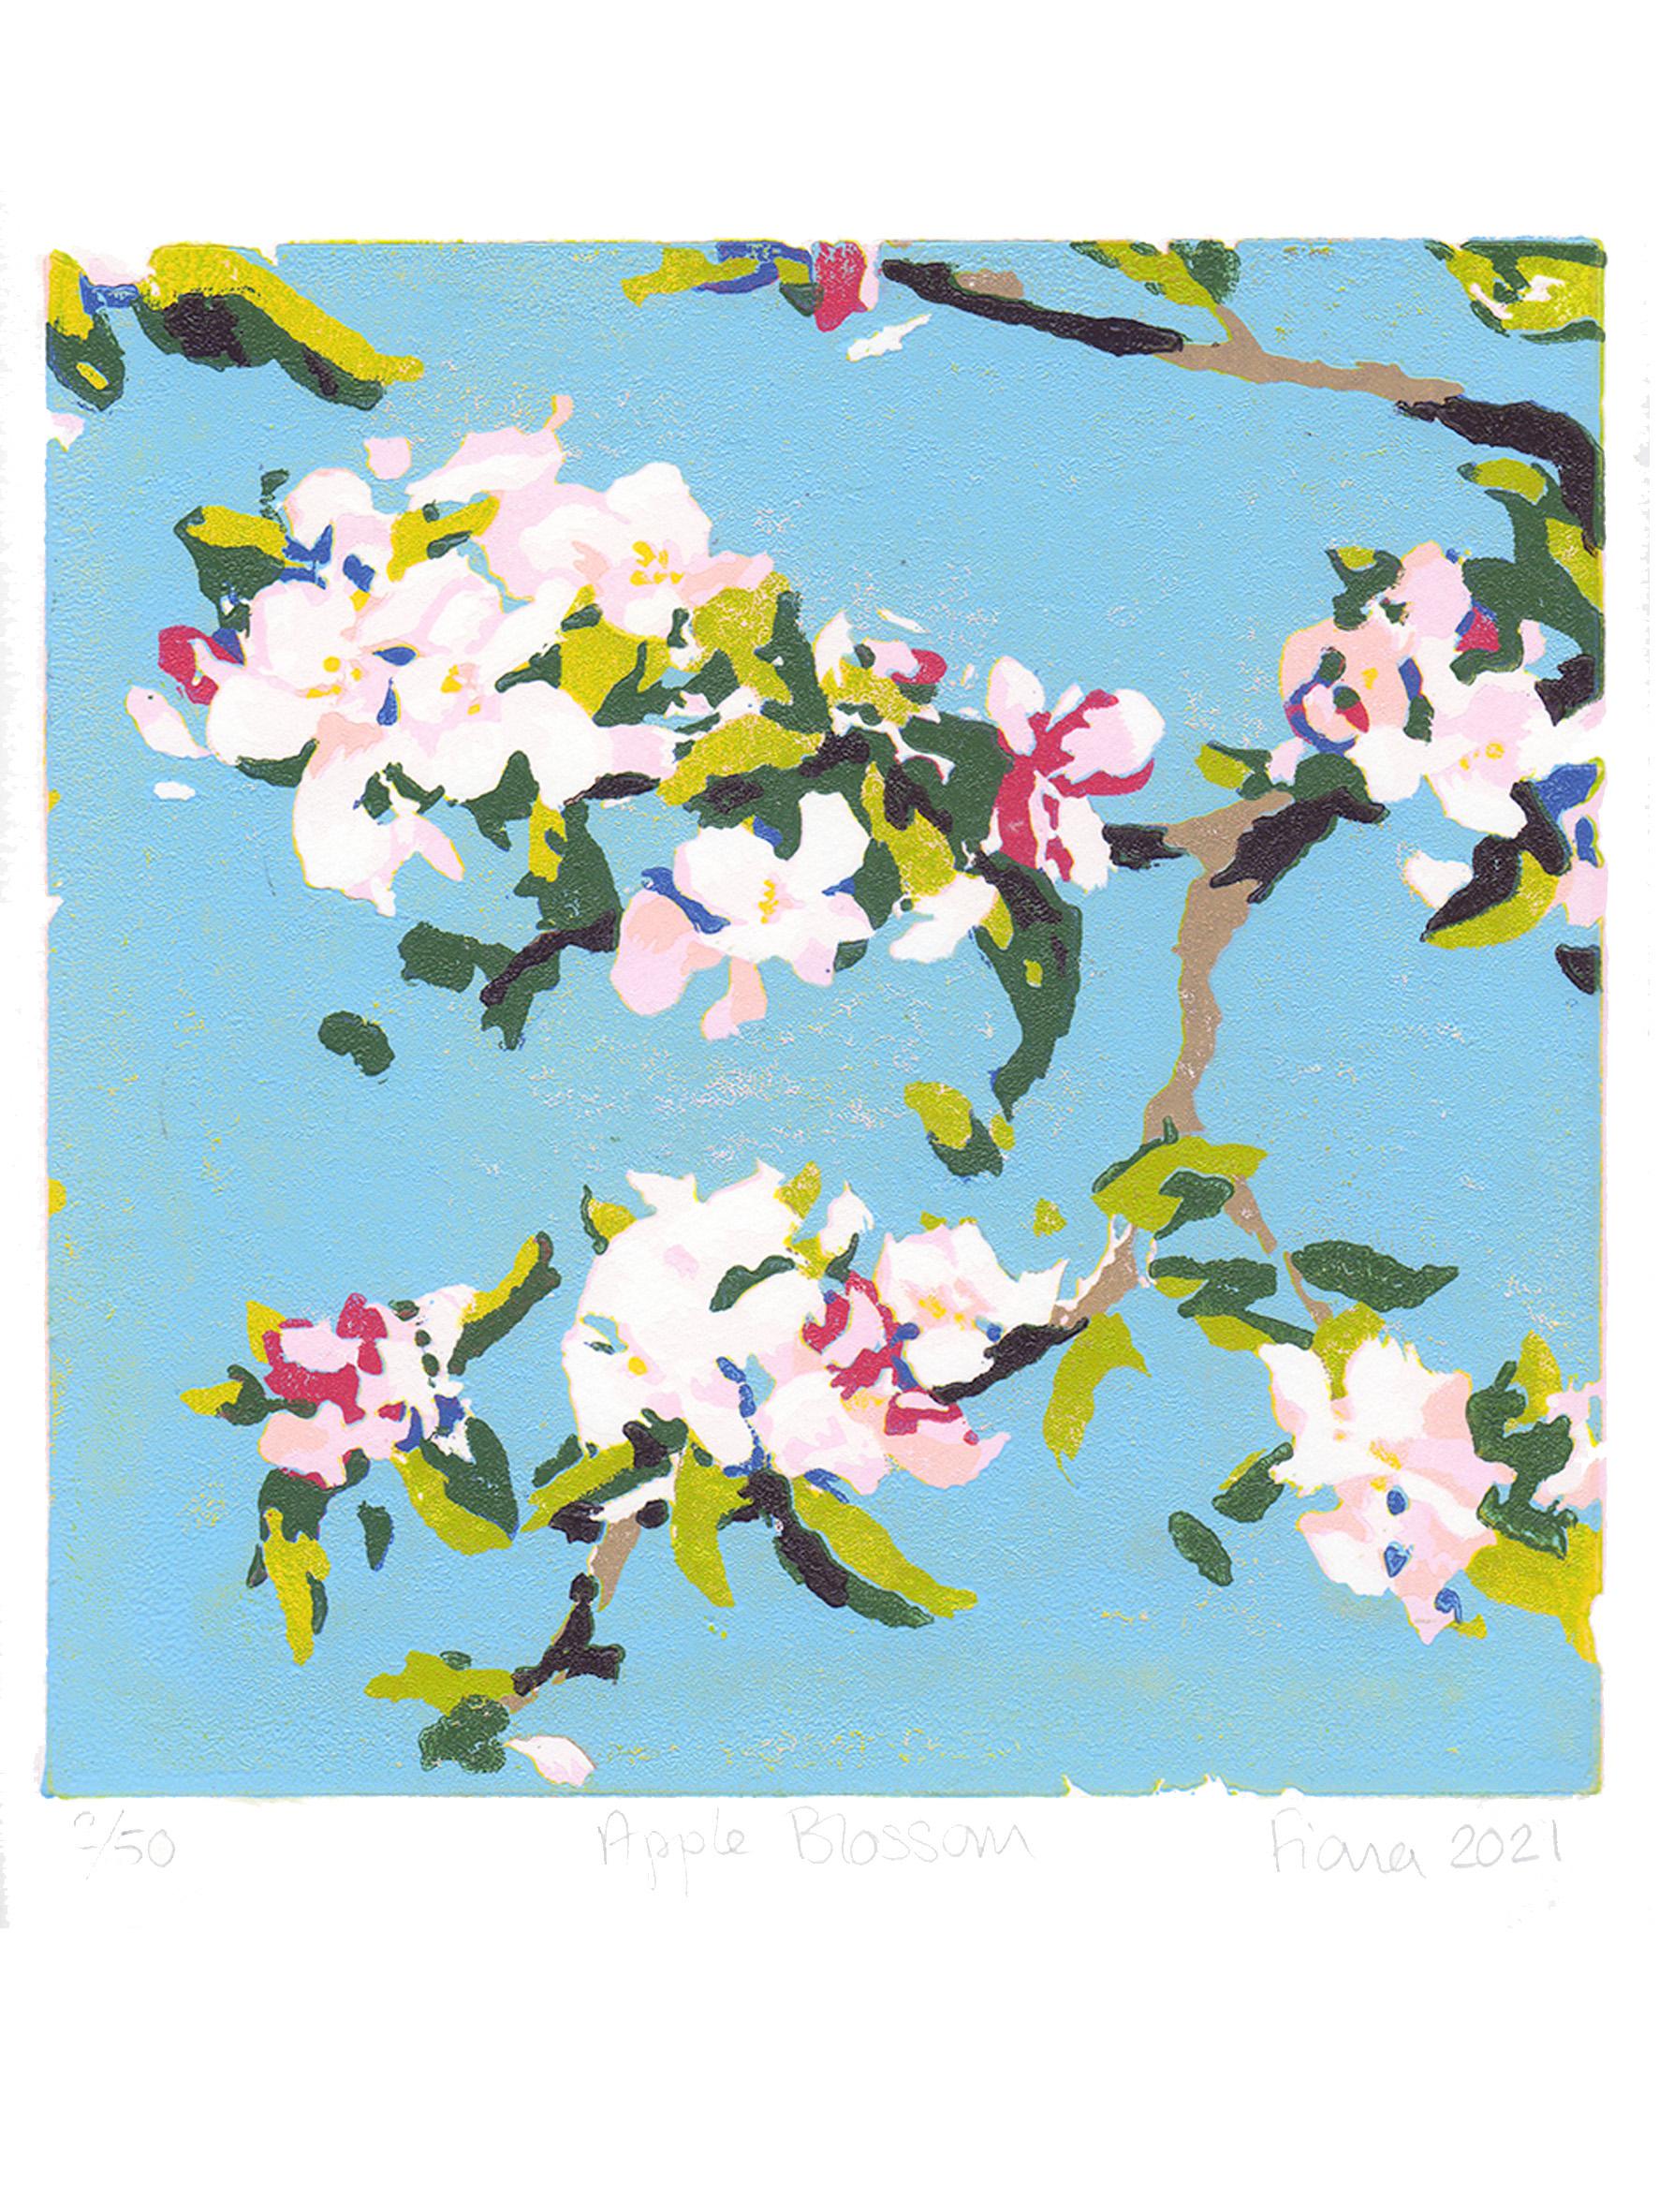 Apple Blossom by Fiona Carver [2021]

Apple Blossom is an original limited edition linocut print by Fiona Carver, inspired by the beautiful spring blossom in her garden. It is a reduction print, meaning that after each colour is printed, a bit more